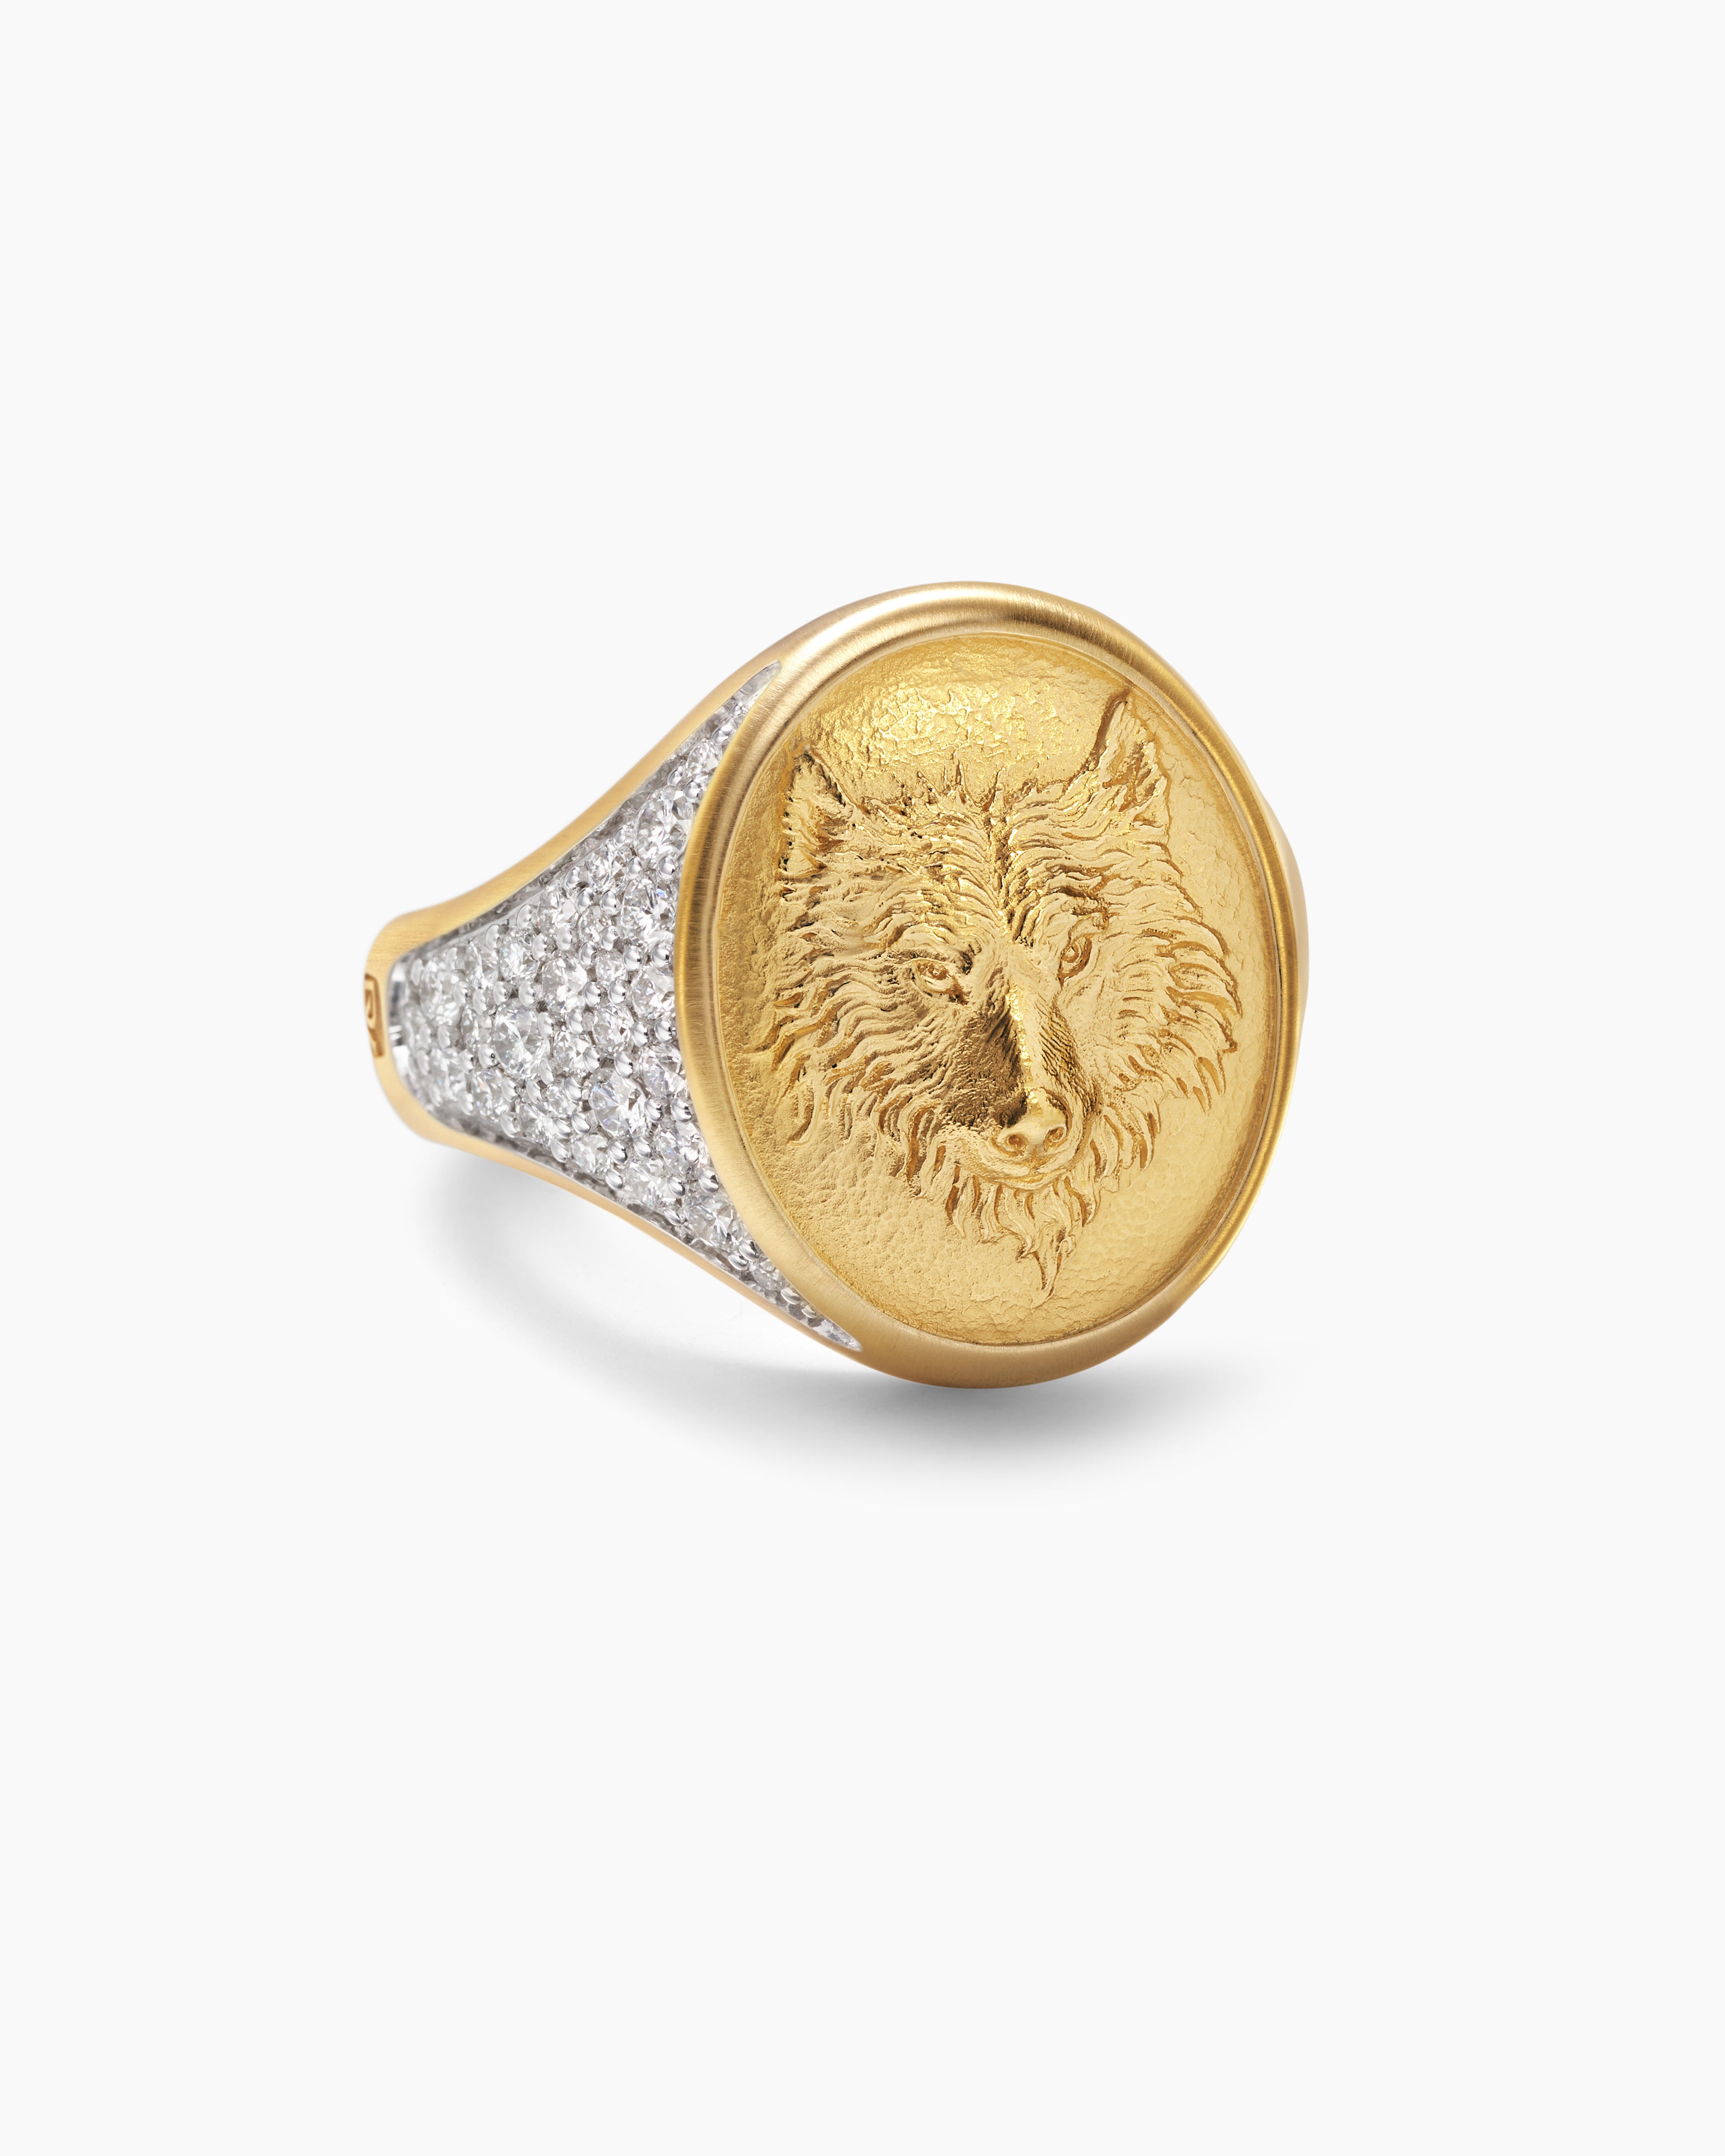 HZMAN Gold Lion Head Ring for Men Women Norse Lion Ring Heavy Metal Rock  Punk Style Gothic Totem Amulet Ring (Gold, 8)|Amazon.com